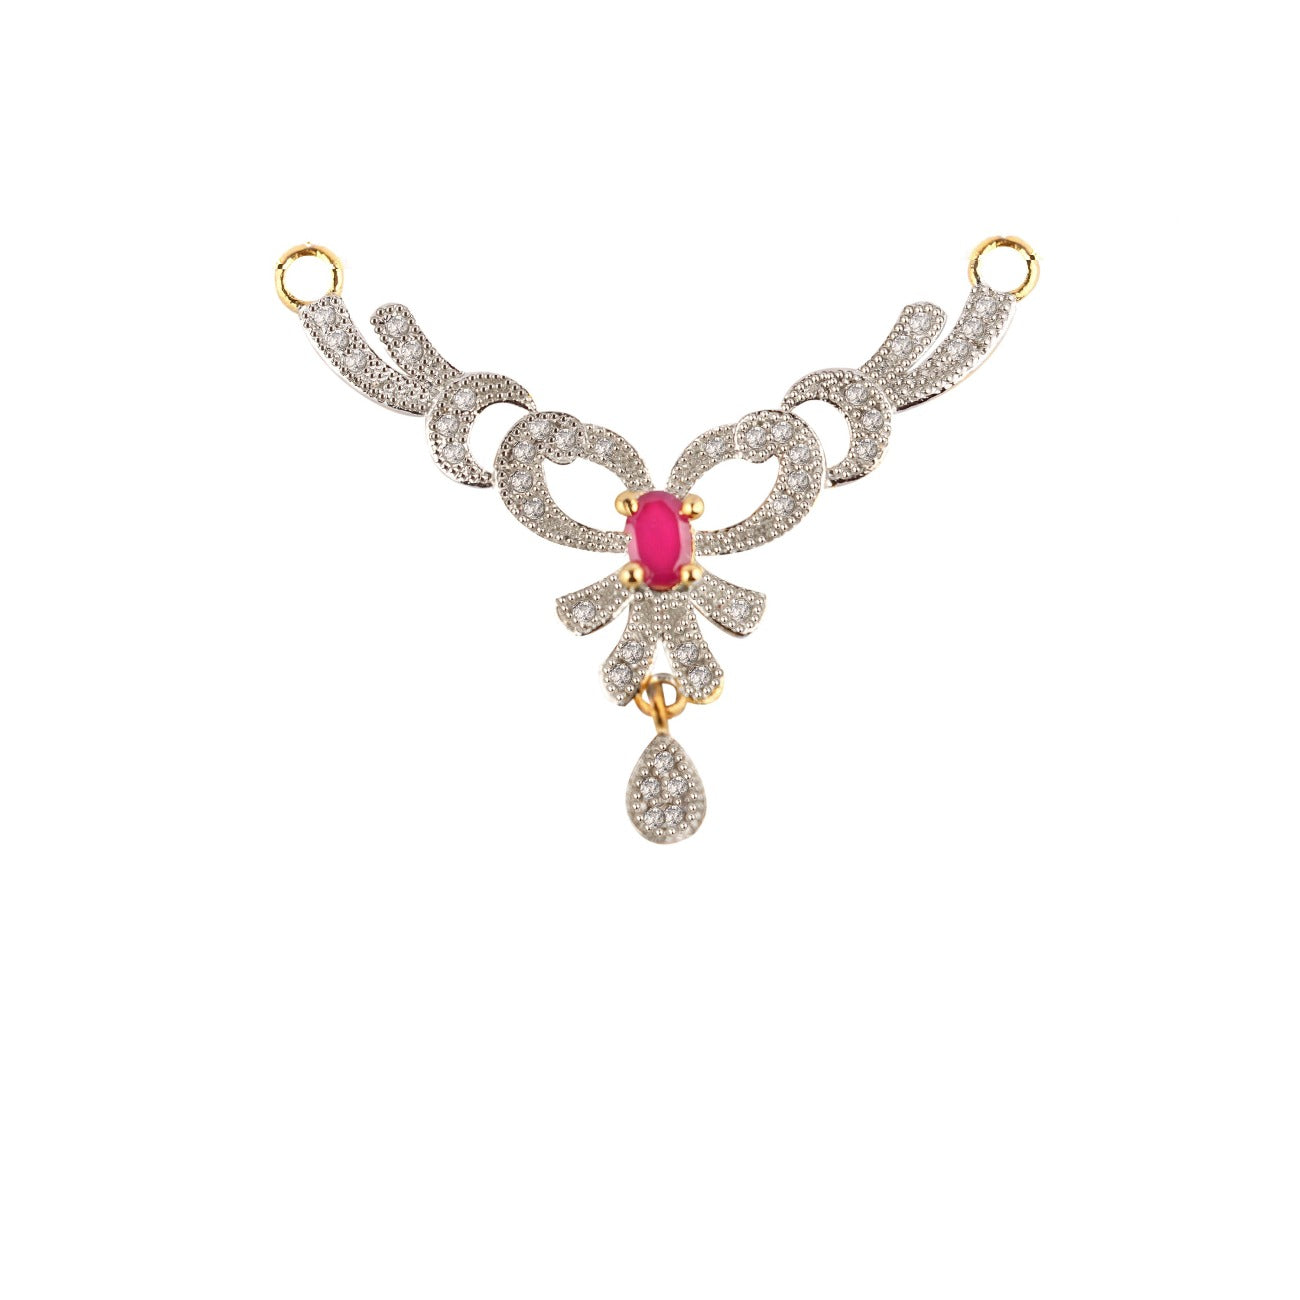 Abhinn Designer Knot Shape Mangal Sutra With Earrings Pink-White AD Stones Stones